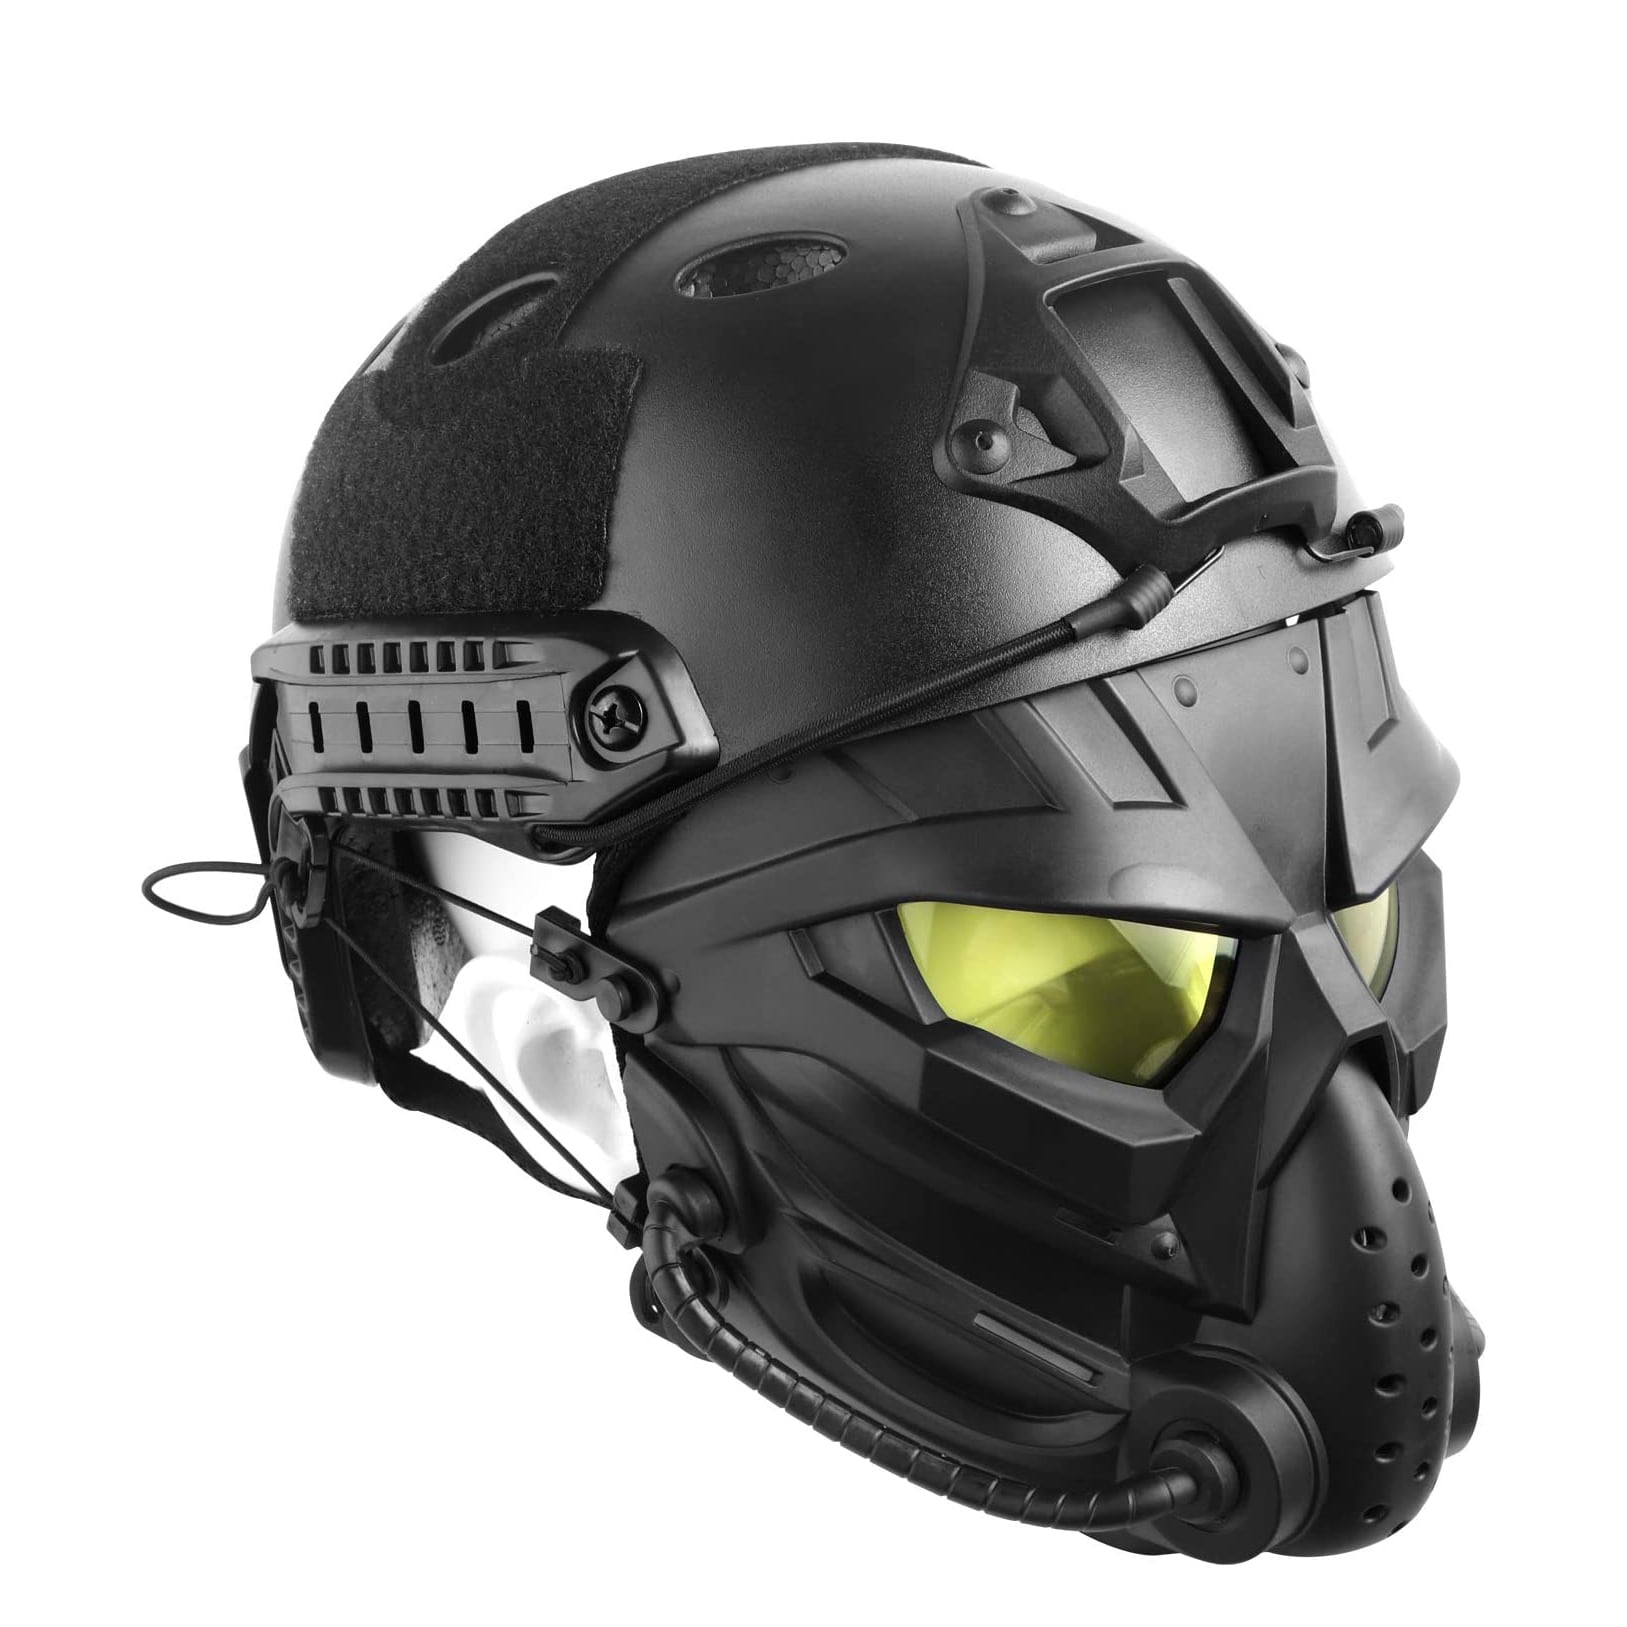 Airsoft Multi-Function Iron Mesh Mask with Fast Helmet and Tactical Goggles